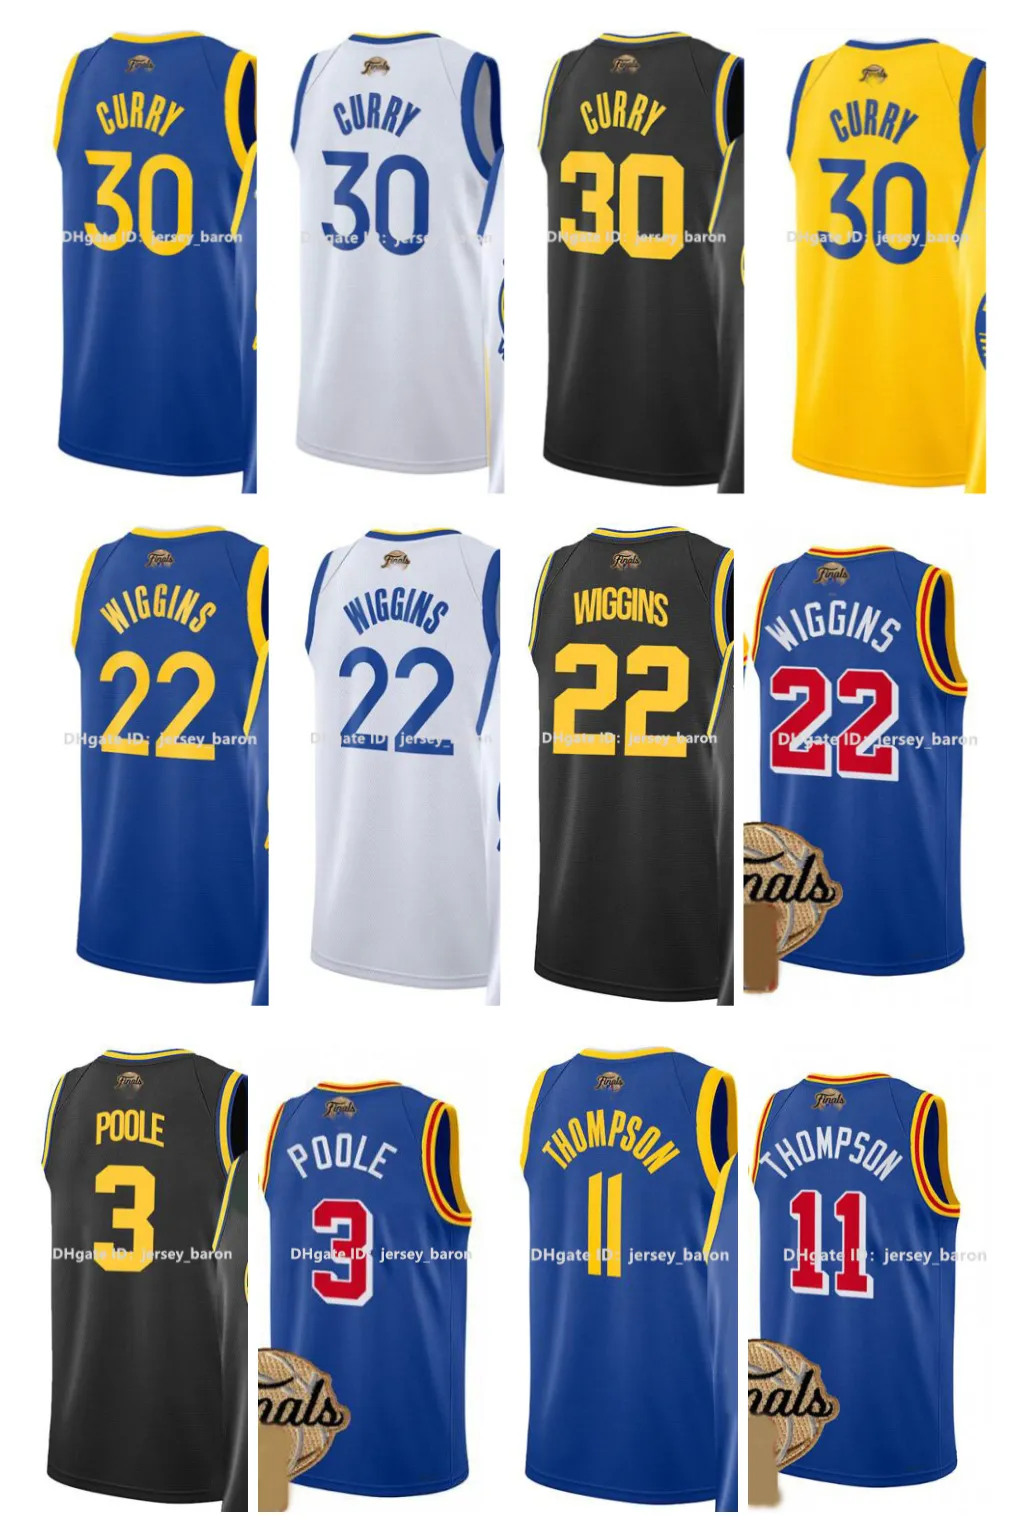 2022 Finals Patch Stephen Curry Basketball Jersey Klay Thompson Sleeveless 75th Andrew Wiggins 3 Poole Jerseys Blue White Black